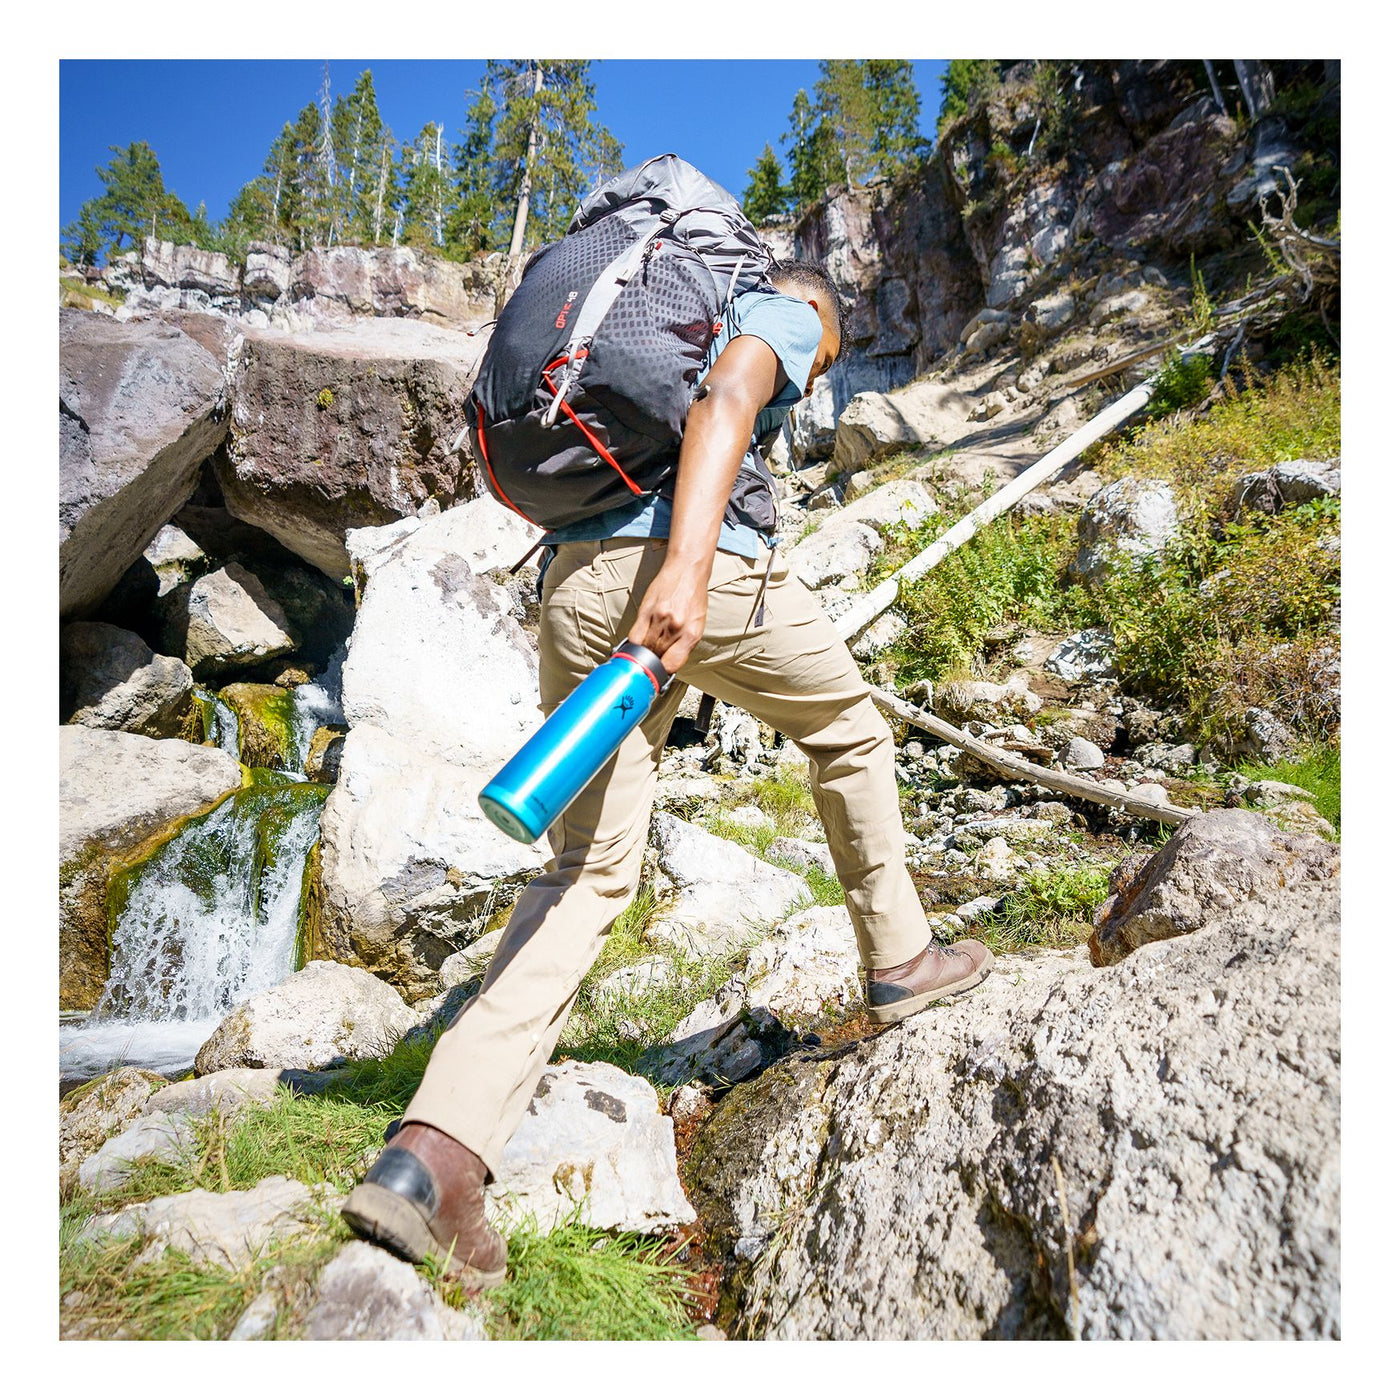 Hydro Flask 32 oz Lightweight Wide Mouth Trail Series™